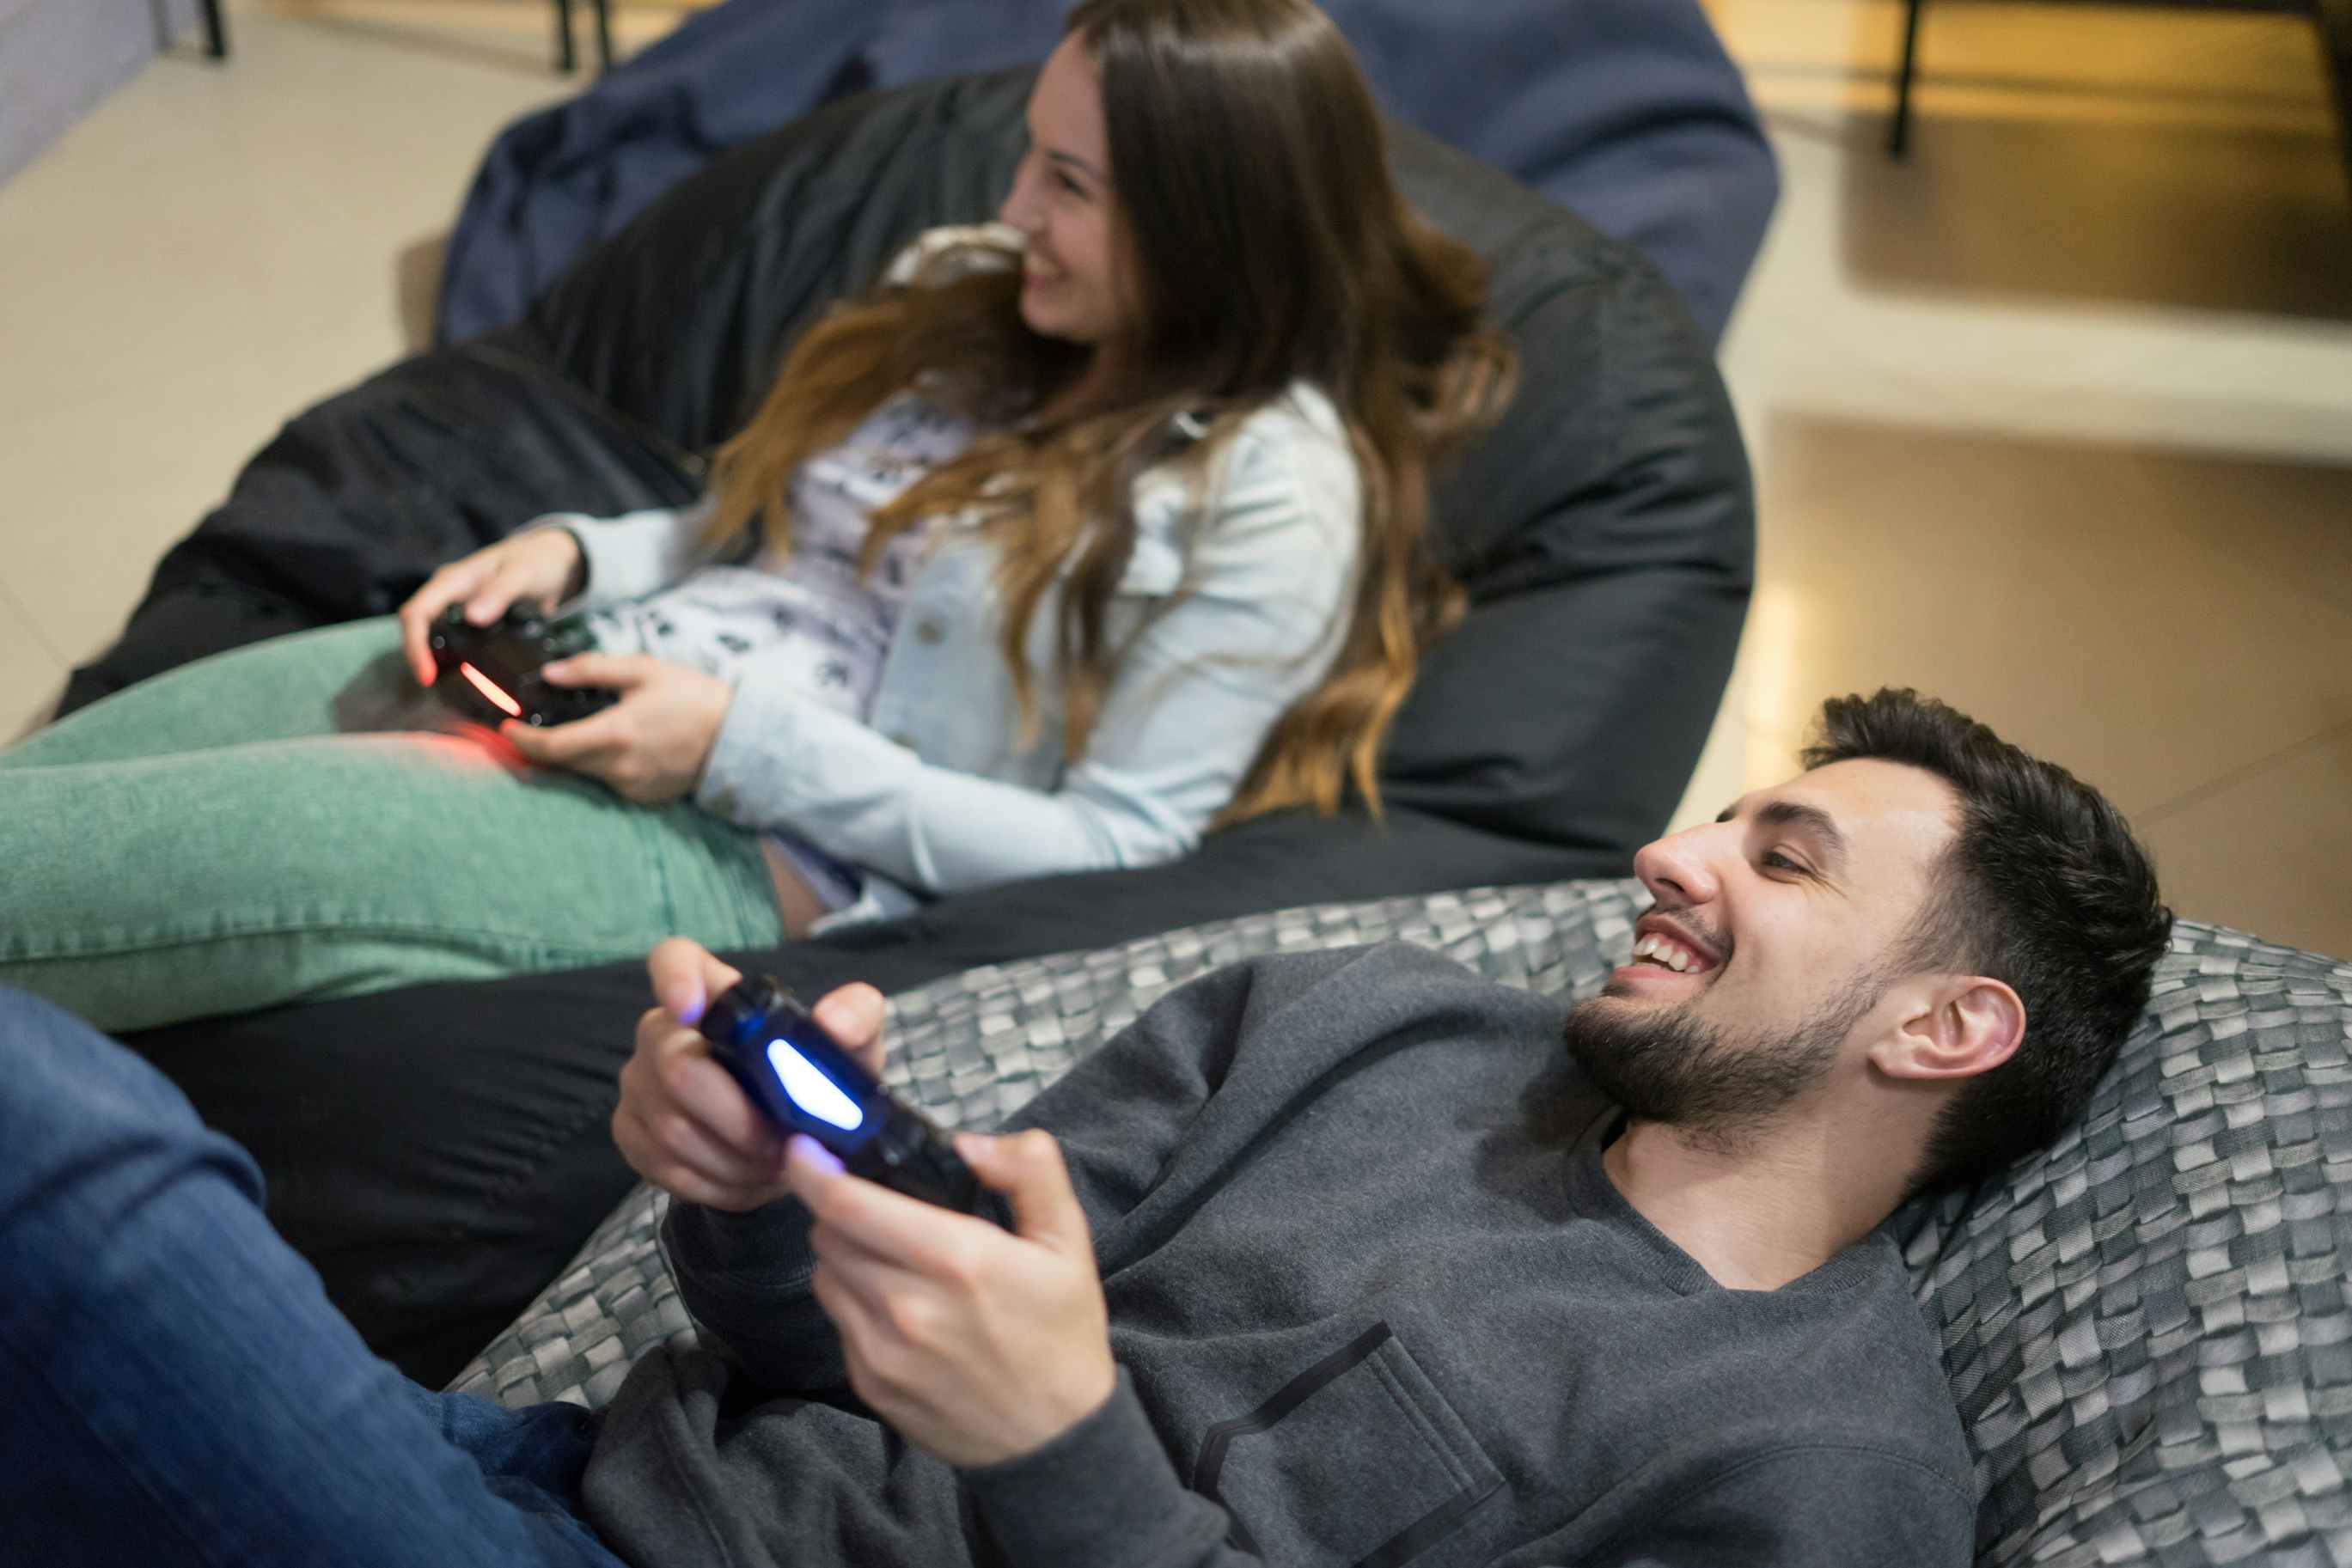 A couple sitting on bean bag chairs playing a video game together